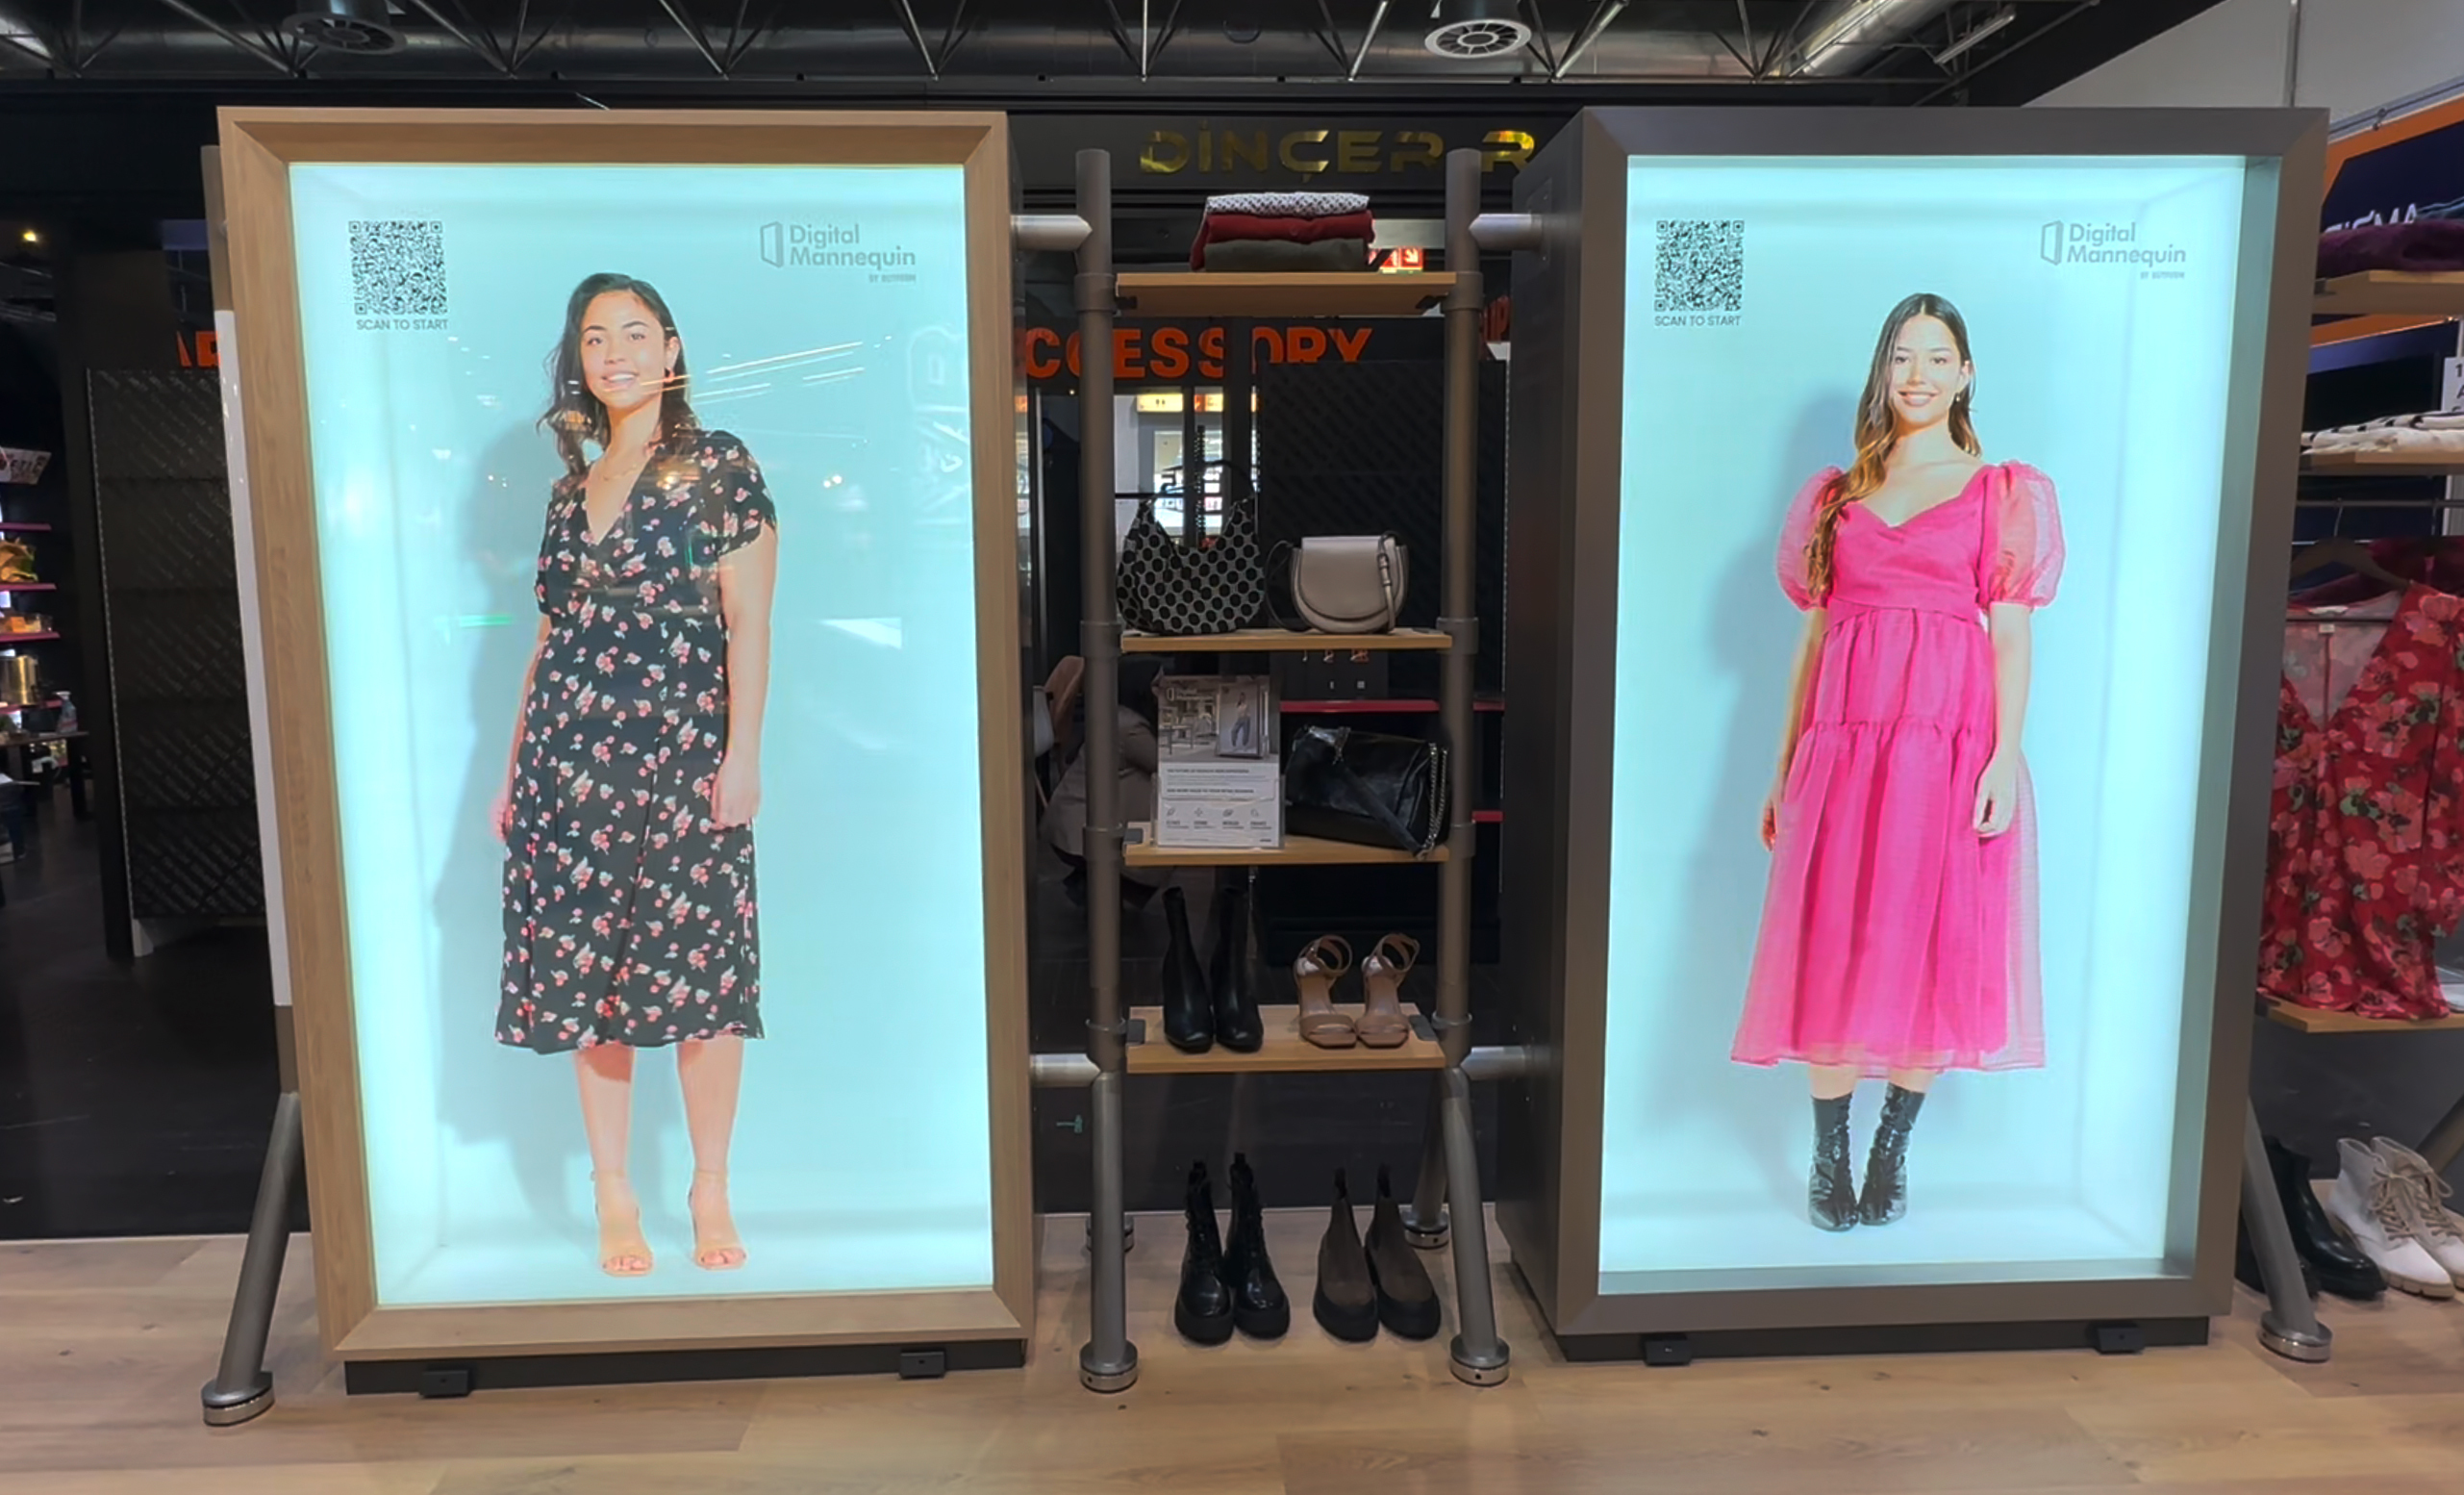 Holograms, AR technology and RFID tags: The store of the future is